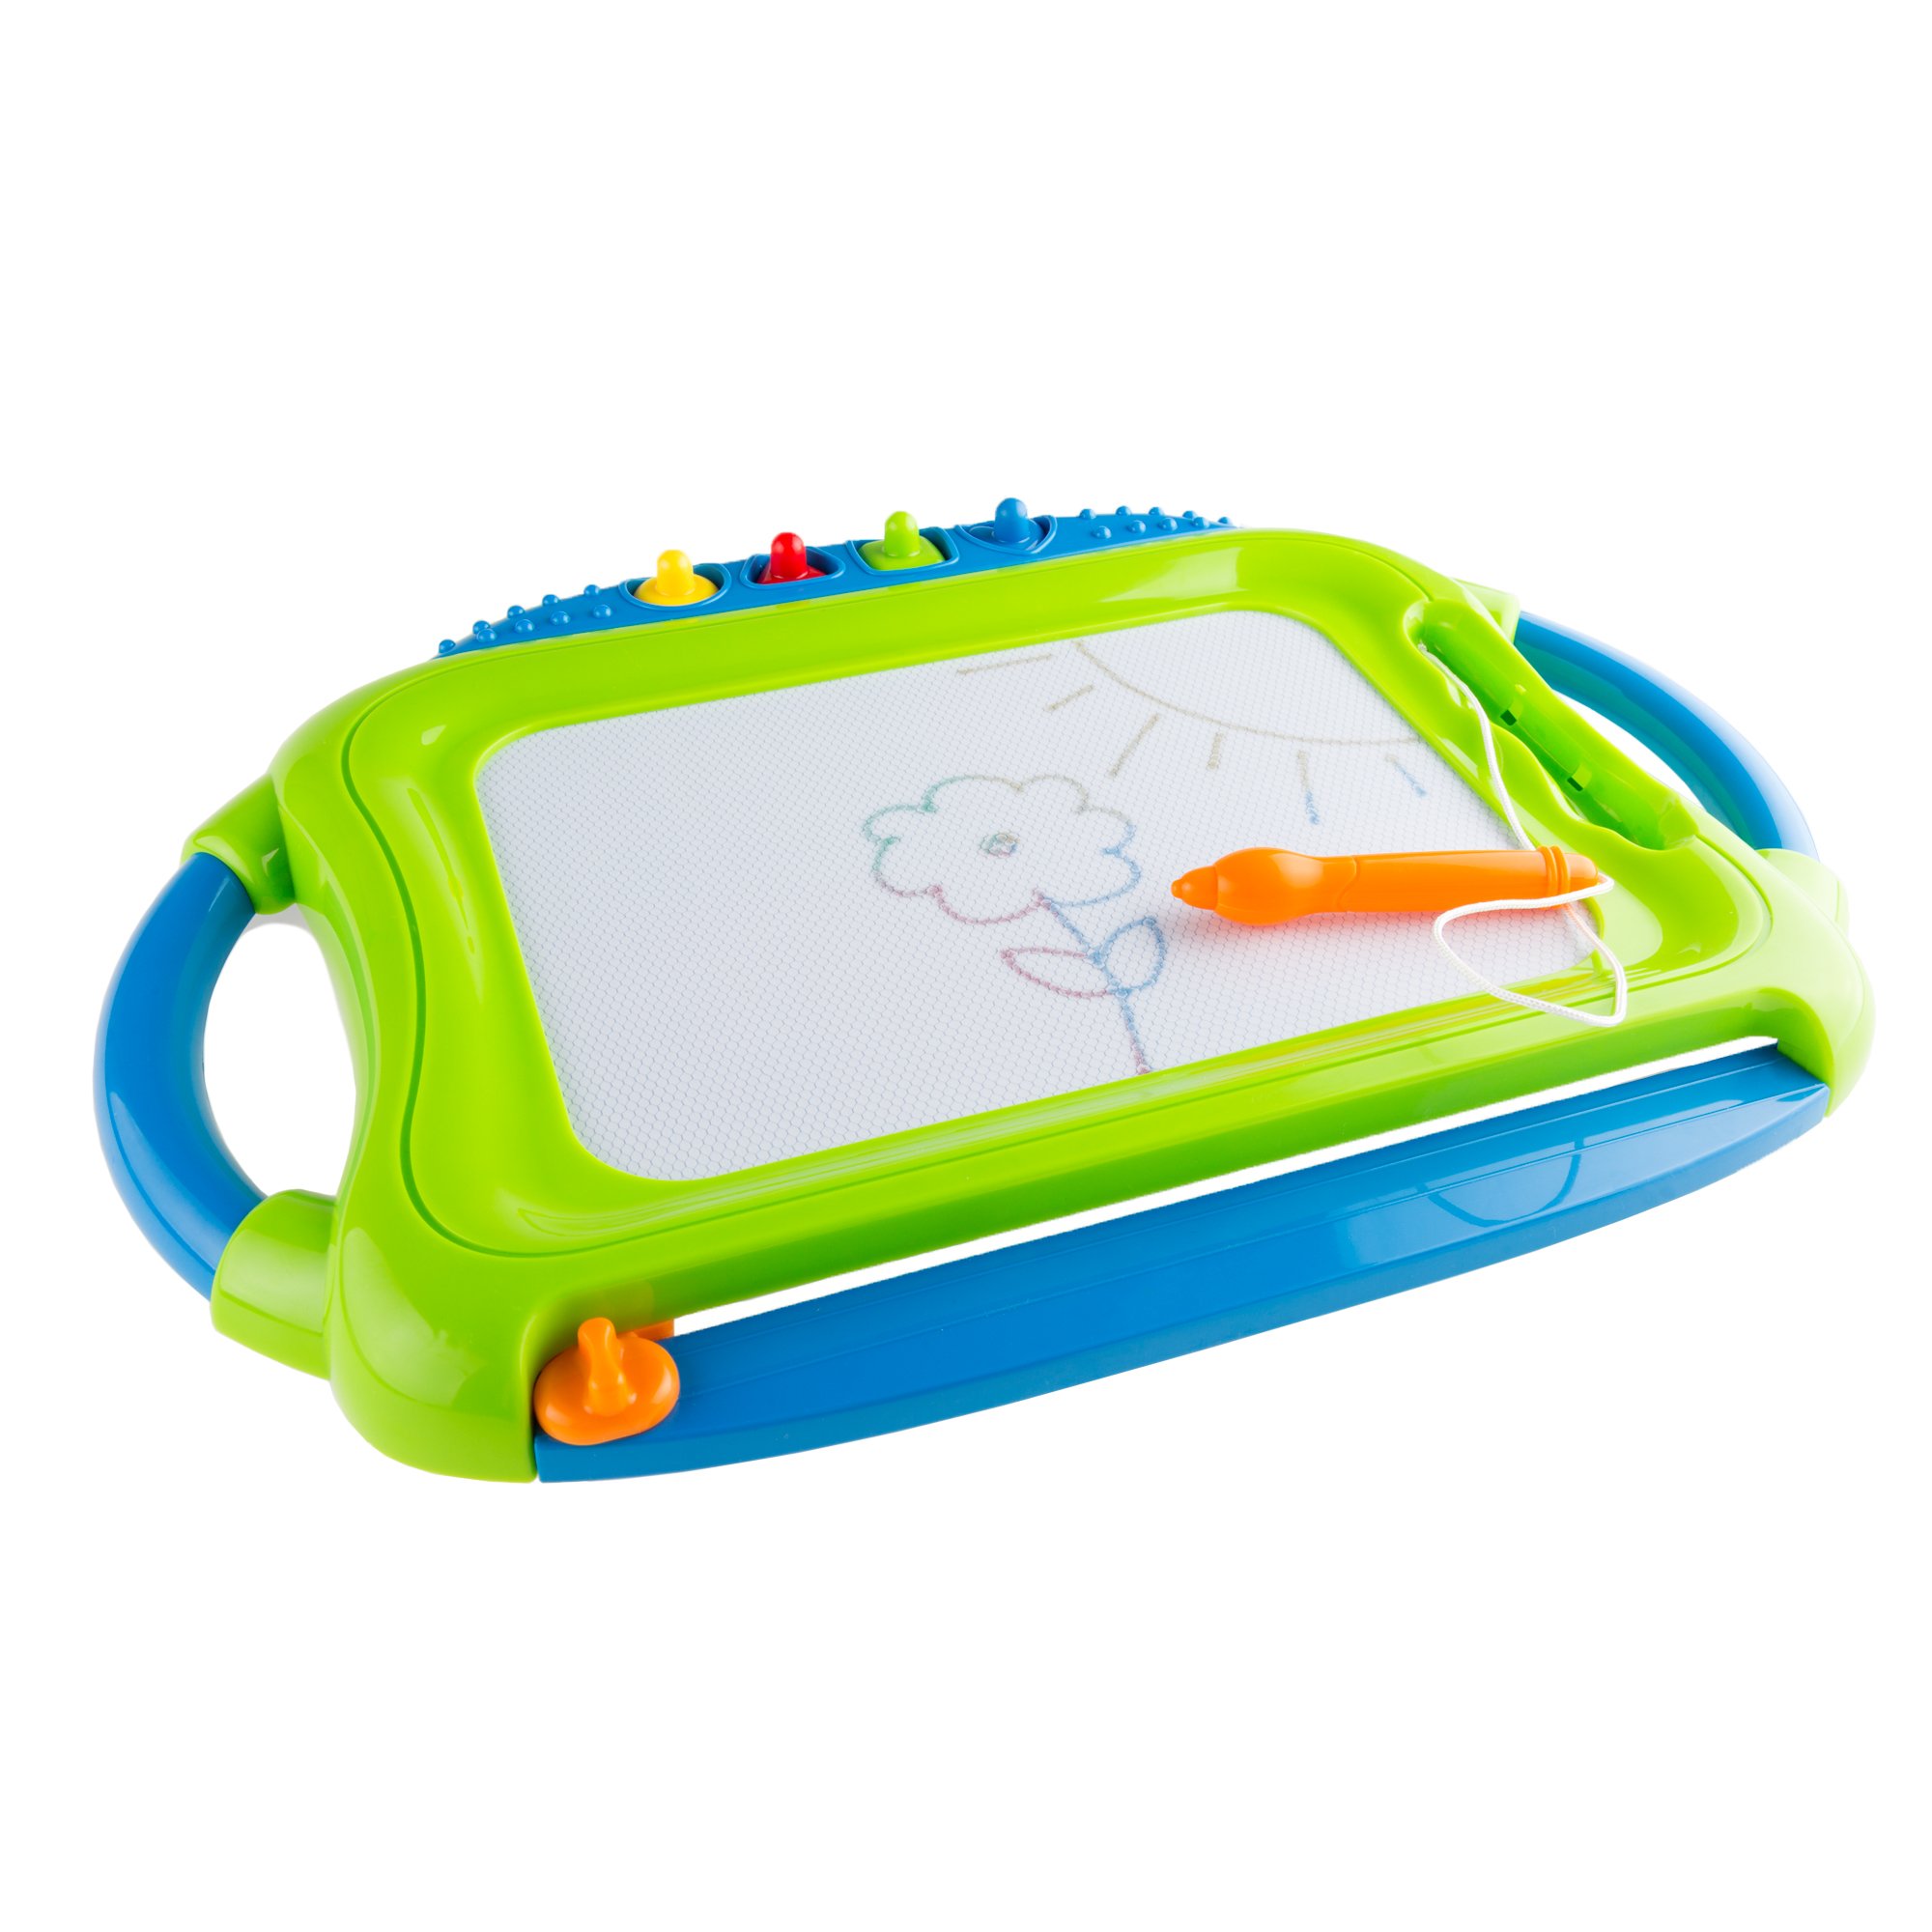 Hey! Play! Magnetic Doodle Board – Classic Drawing, Writing and Sketching Creative Toy with 4 Magnet Stamps, Pen and Eraser for Toddlers and Babies Green/Blue, 18.5